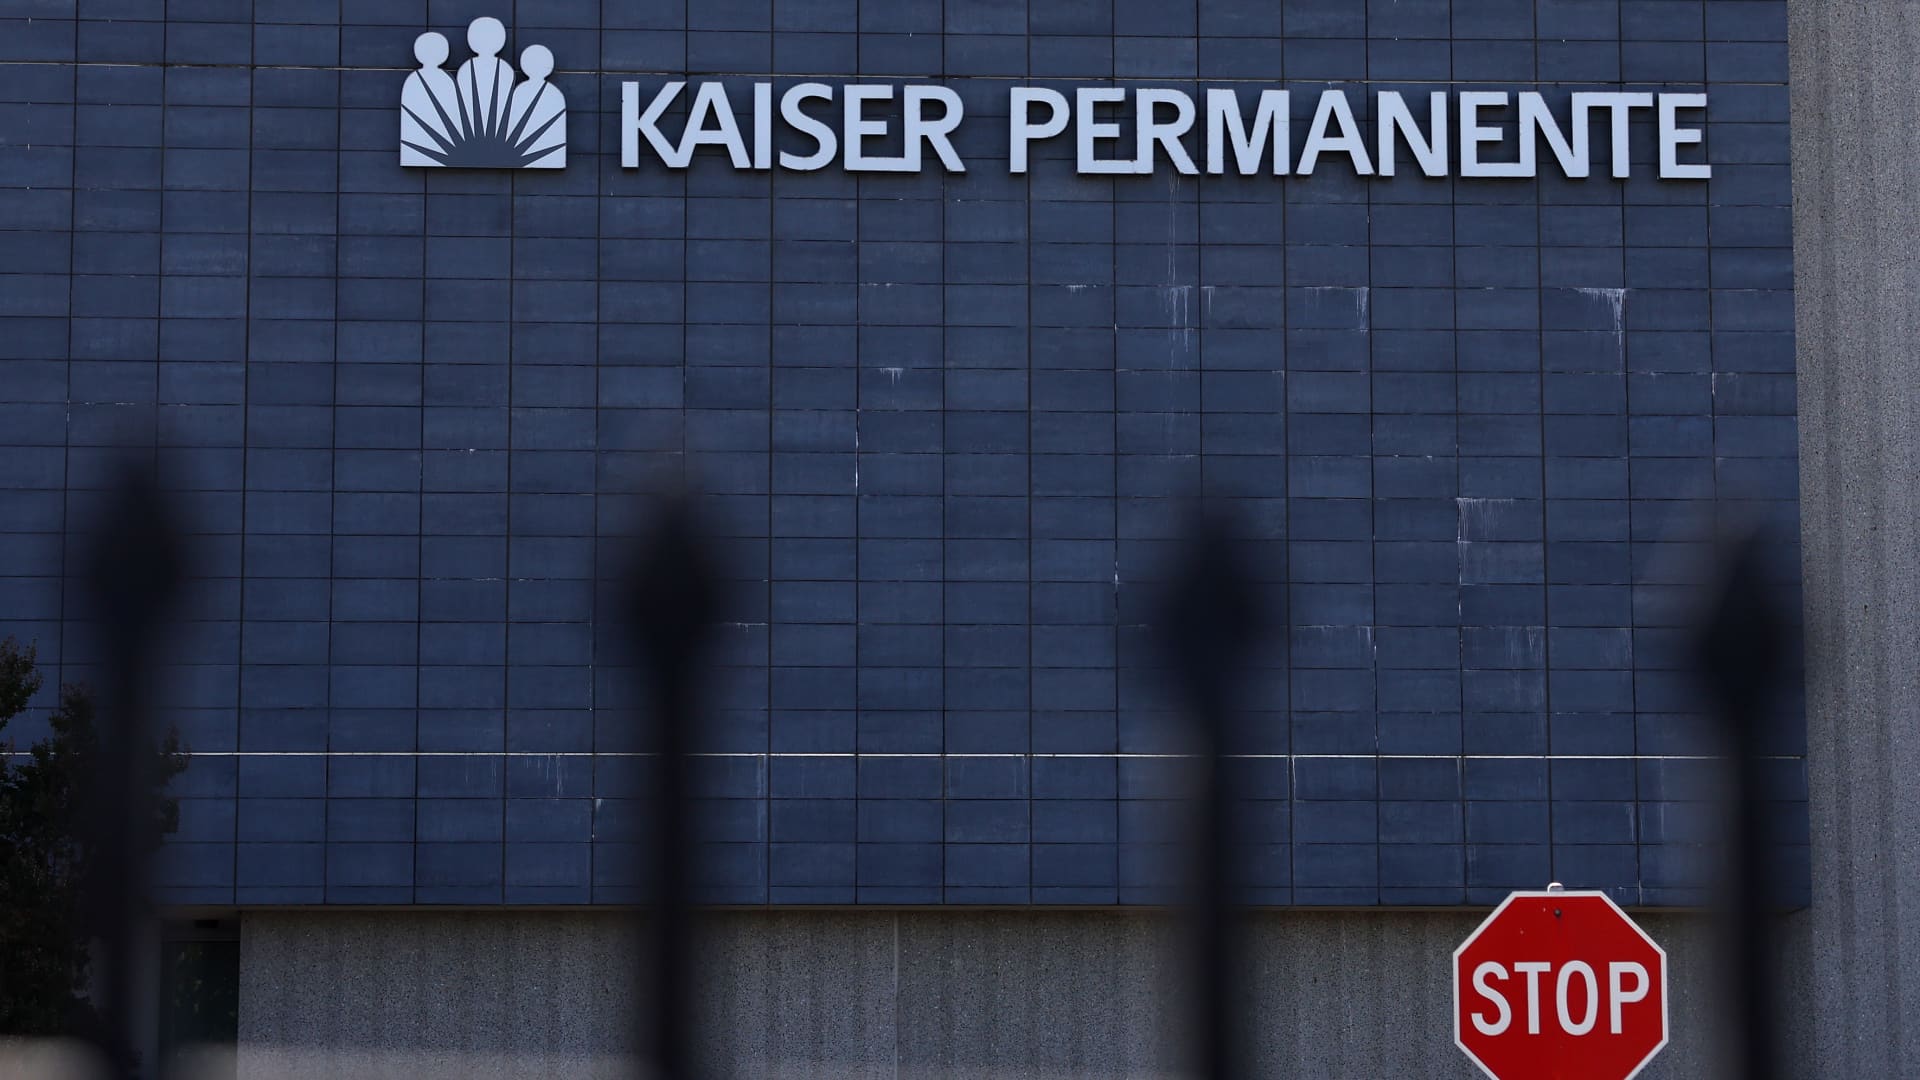 Kaiser Permanente union employees poised to strike after contract expires